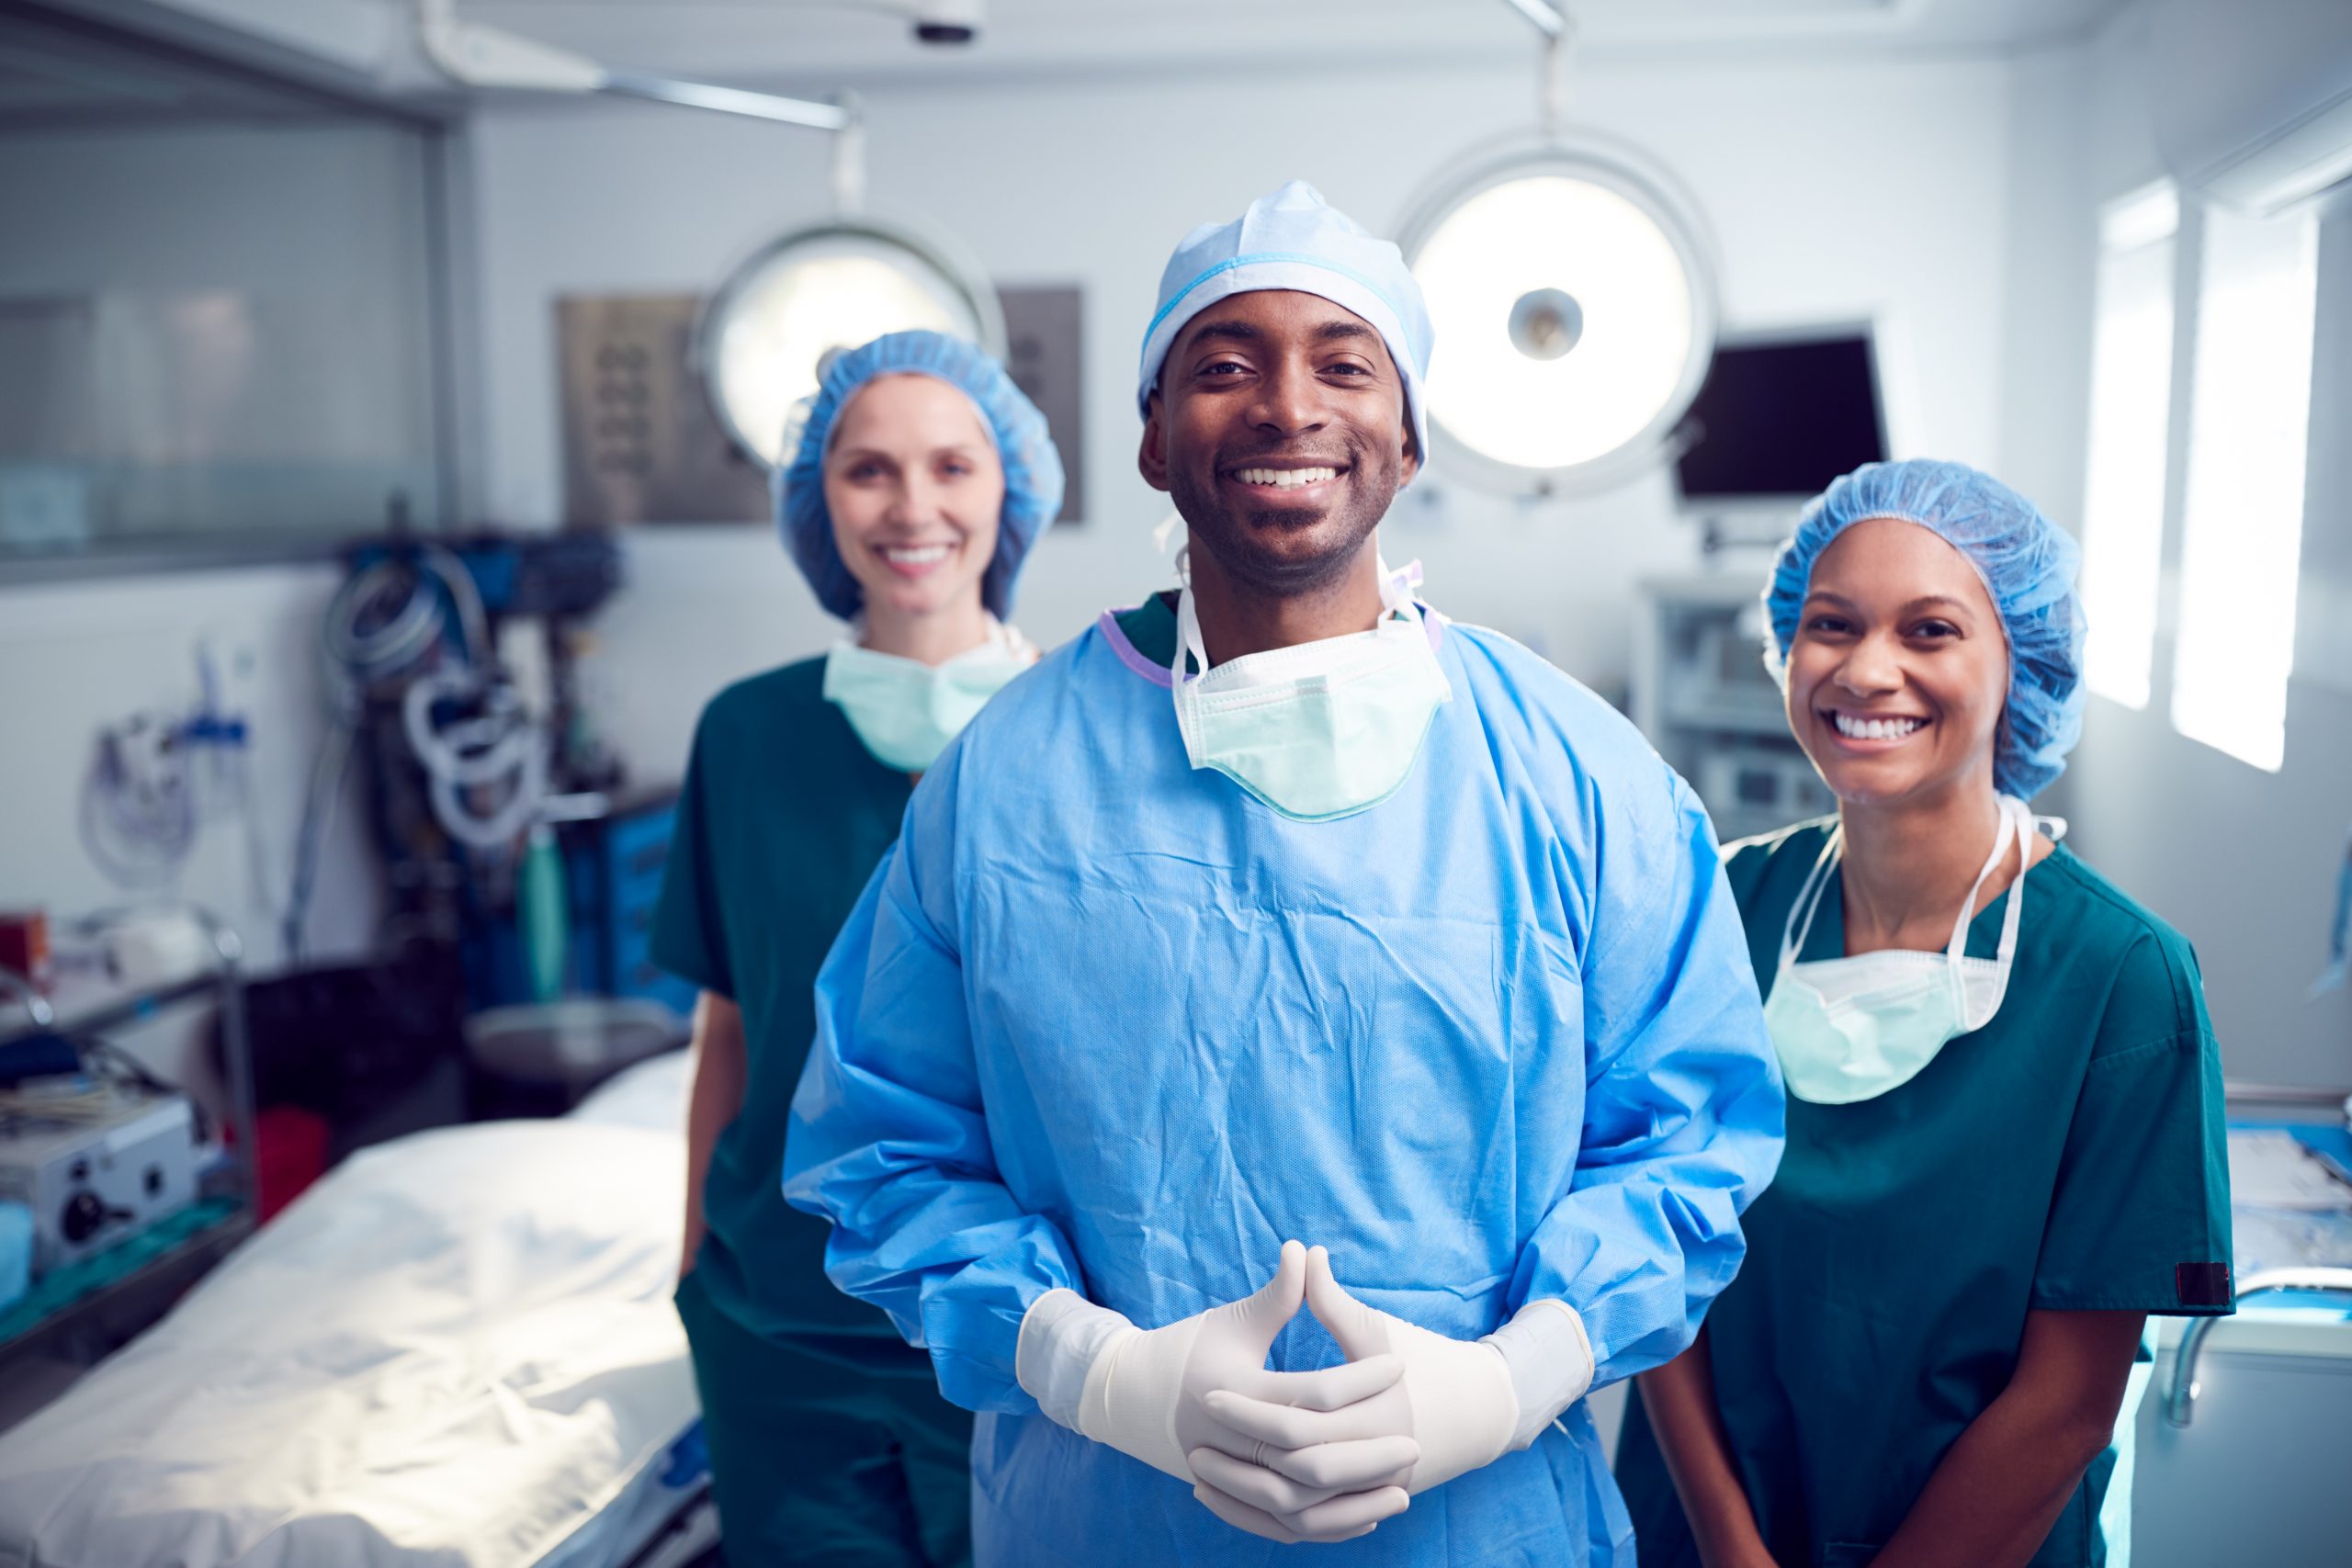 https://www.nzats.co.nz/wp-content/uploads/2022/05/portrait-of-multi-cultural-surgical-team-standing-2022-02-02-04-51-34-utc-scaled.jpg